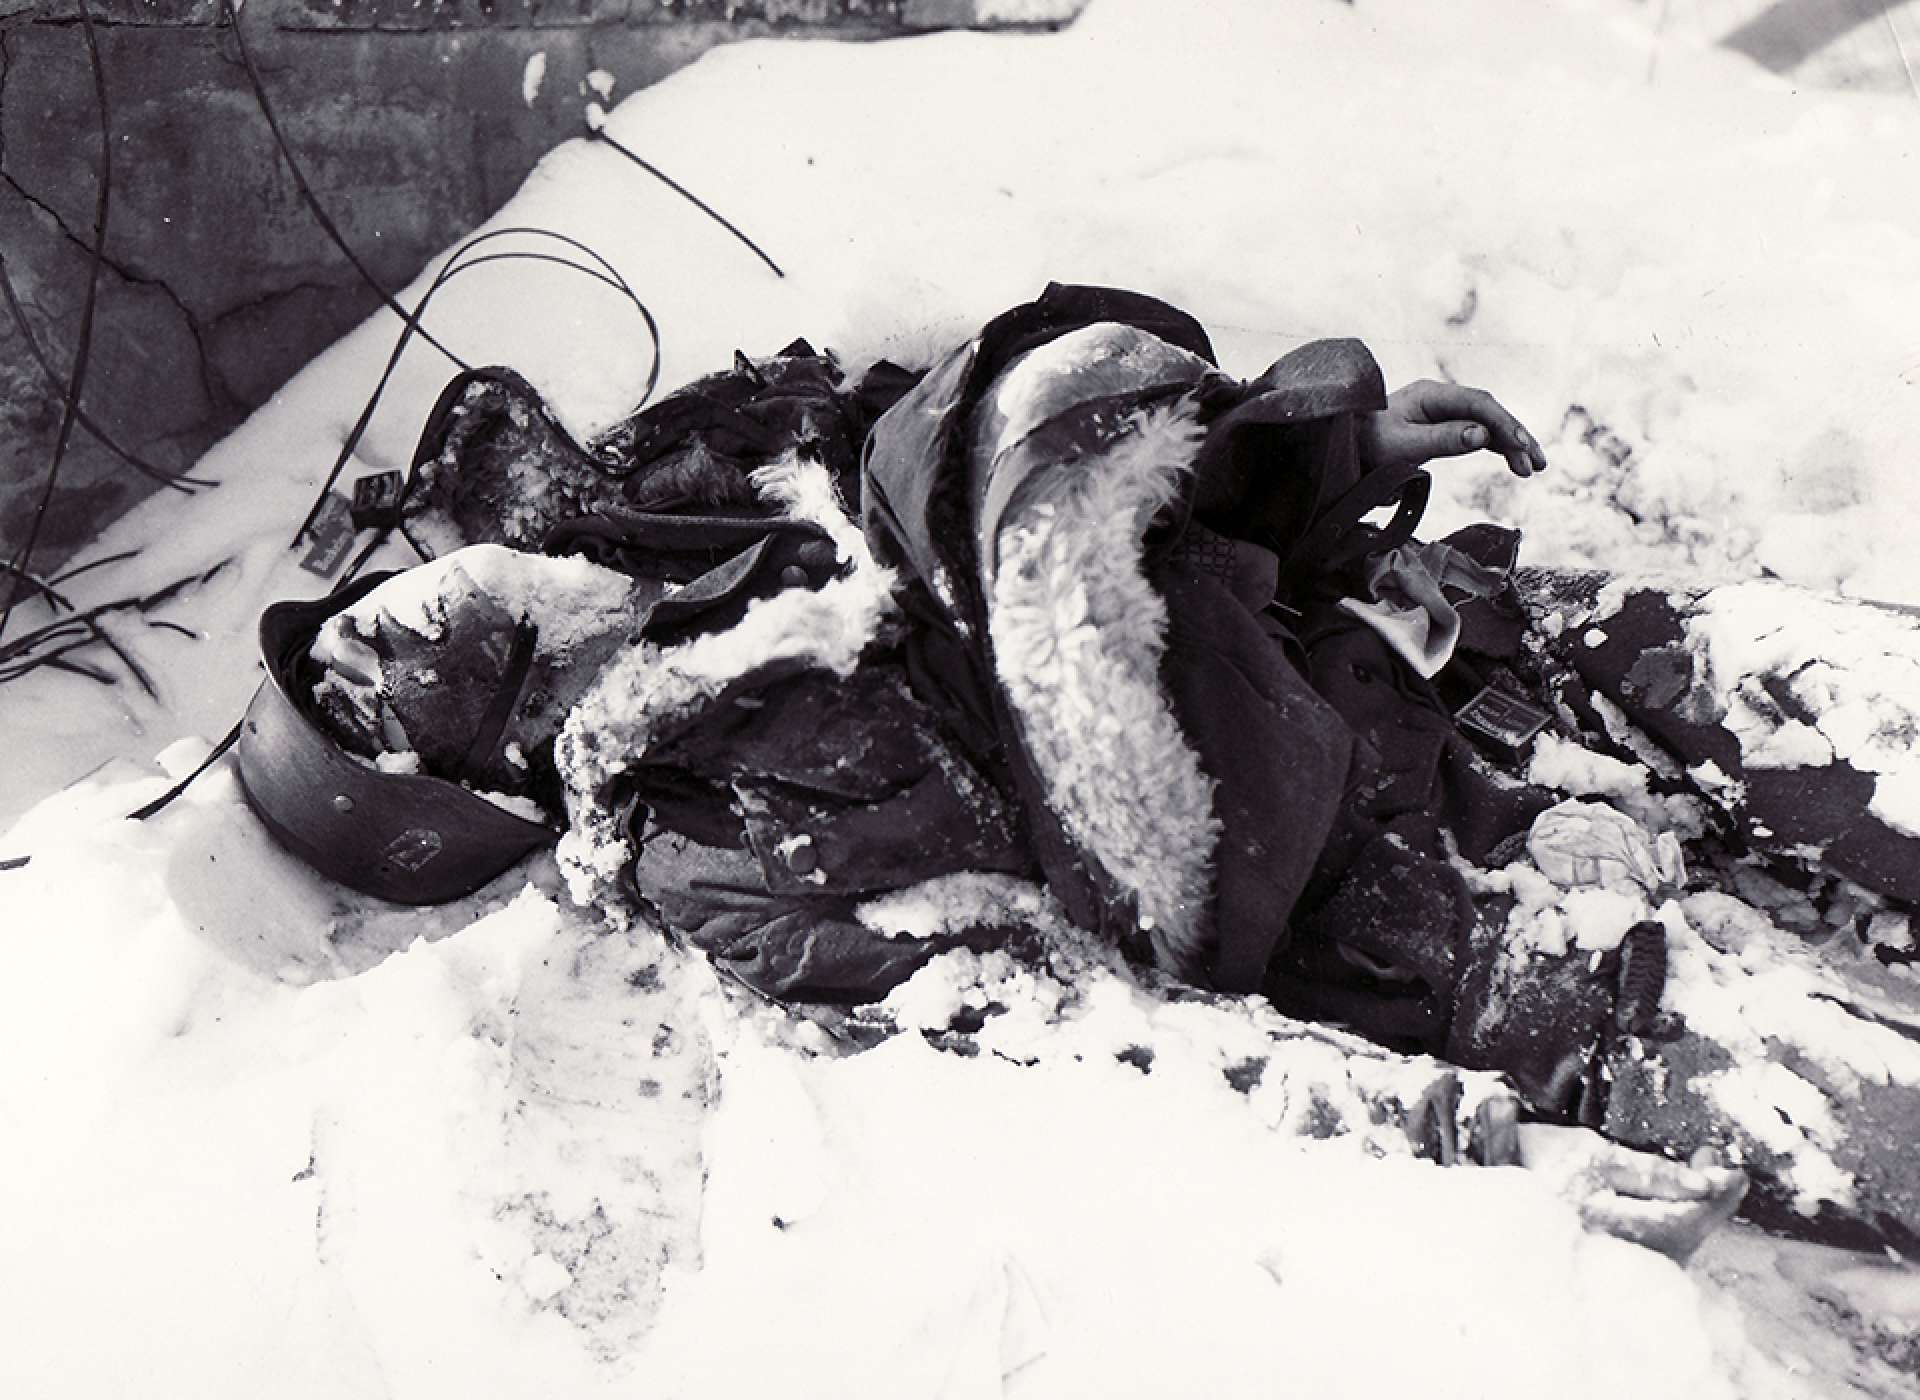 A Panzergrenadier of the Waffen SS lies buried in the snow following the fierce fighting near Elsenborn Ridge. The National WWII Museum Digital Collections.